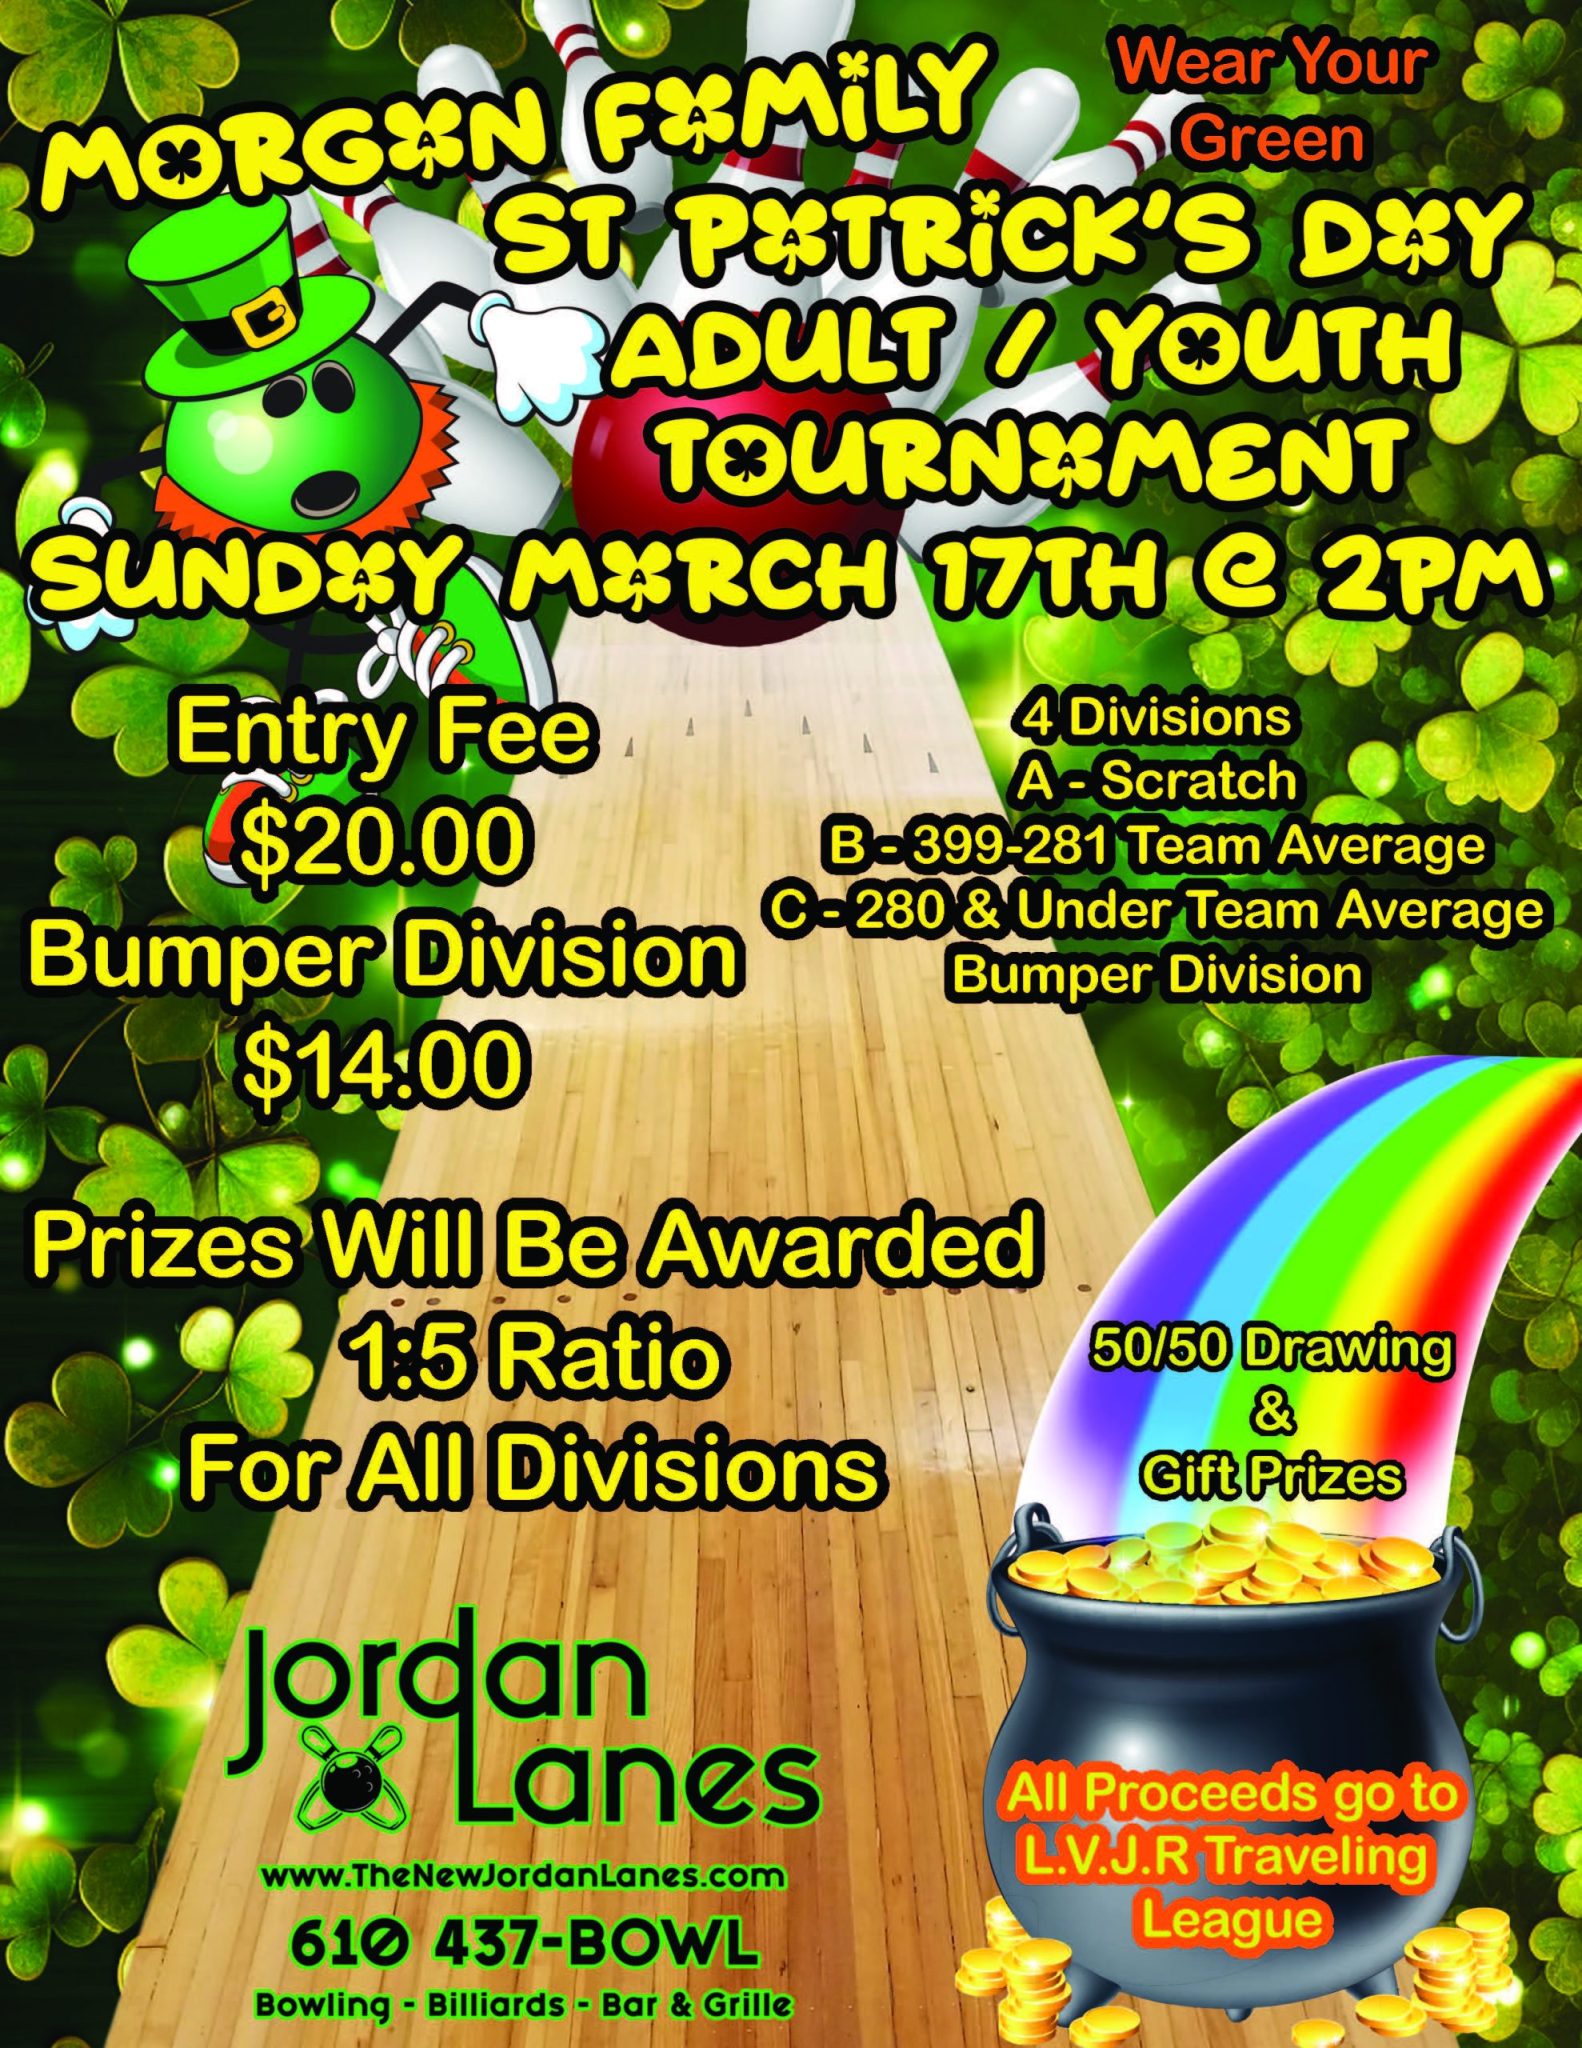 Morgan Family Adult / Youth Tournament 23